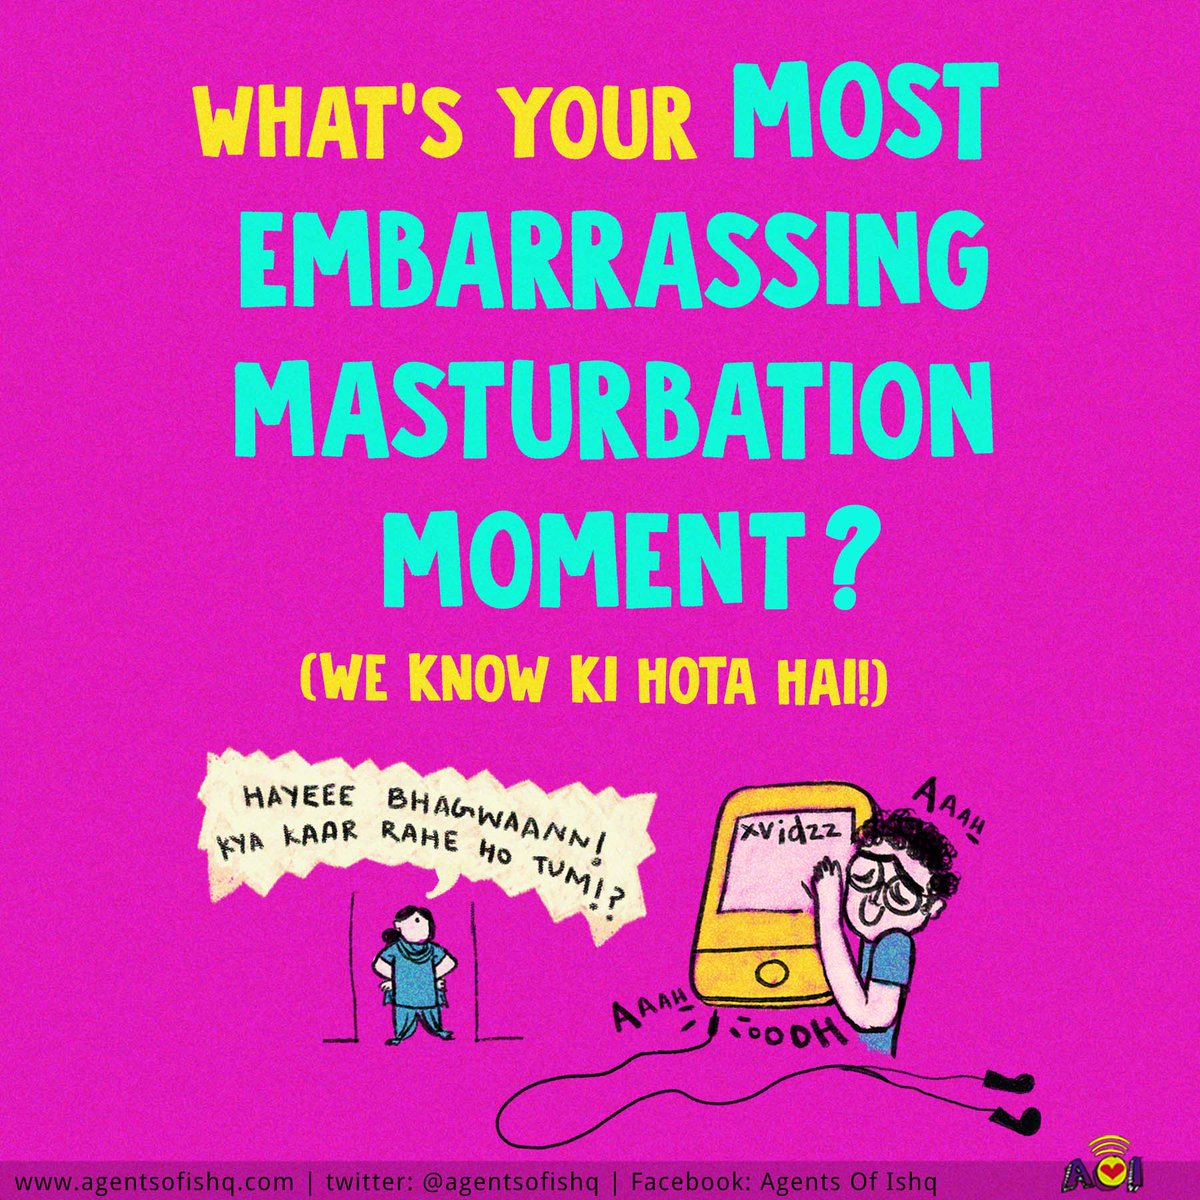 Nobody plans a “dil mai dhak dhak” while going dhak dhak on their ahem ahem. Share your embarrassing moments in the comments (or in our DMs). Sharing is caring, na? 👉👈 #MasturbationMAy